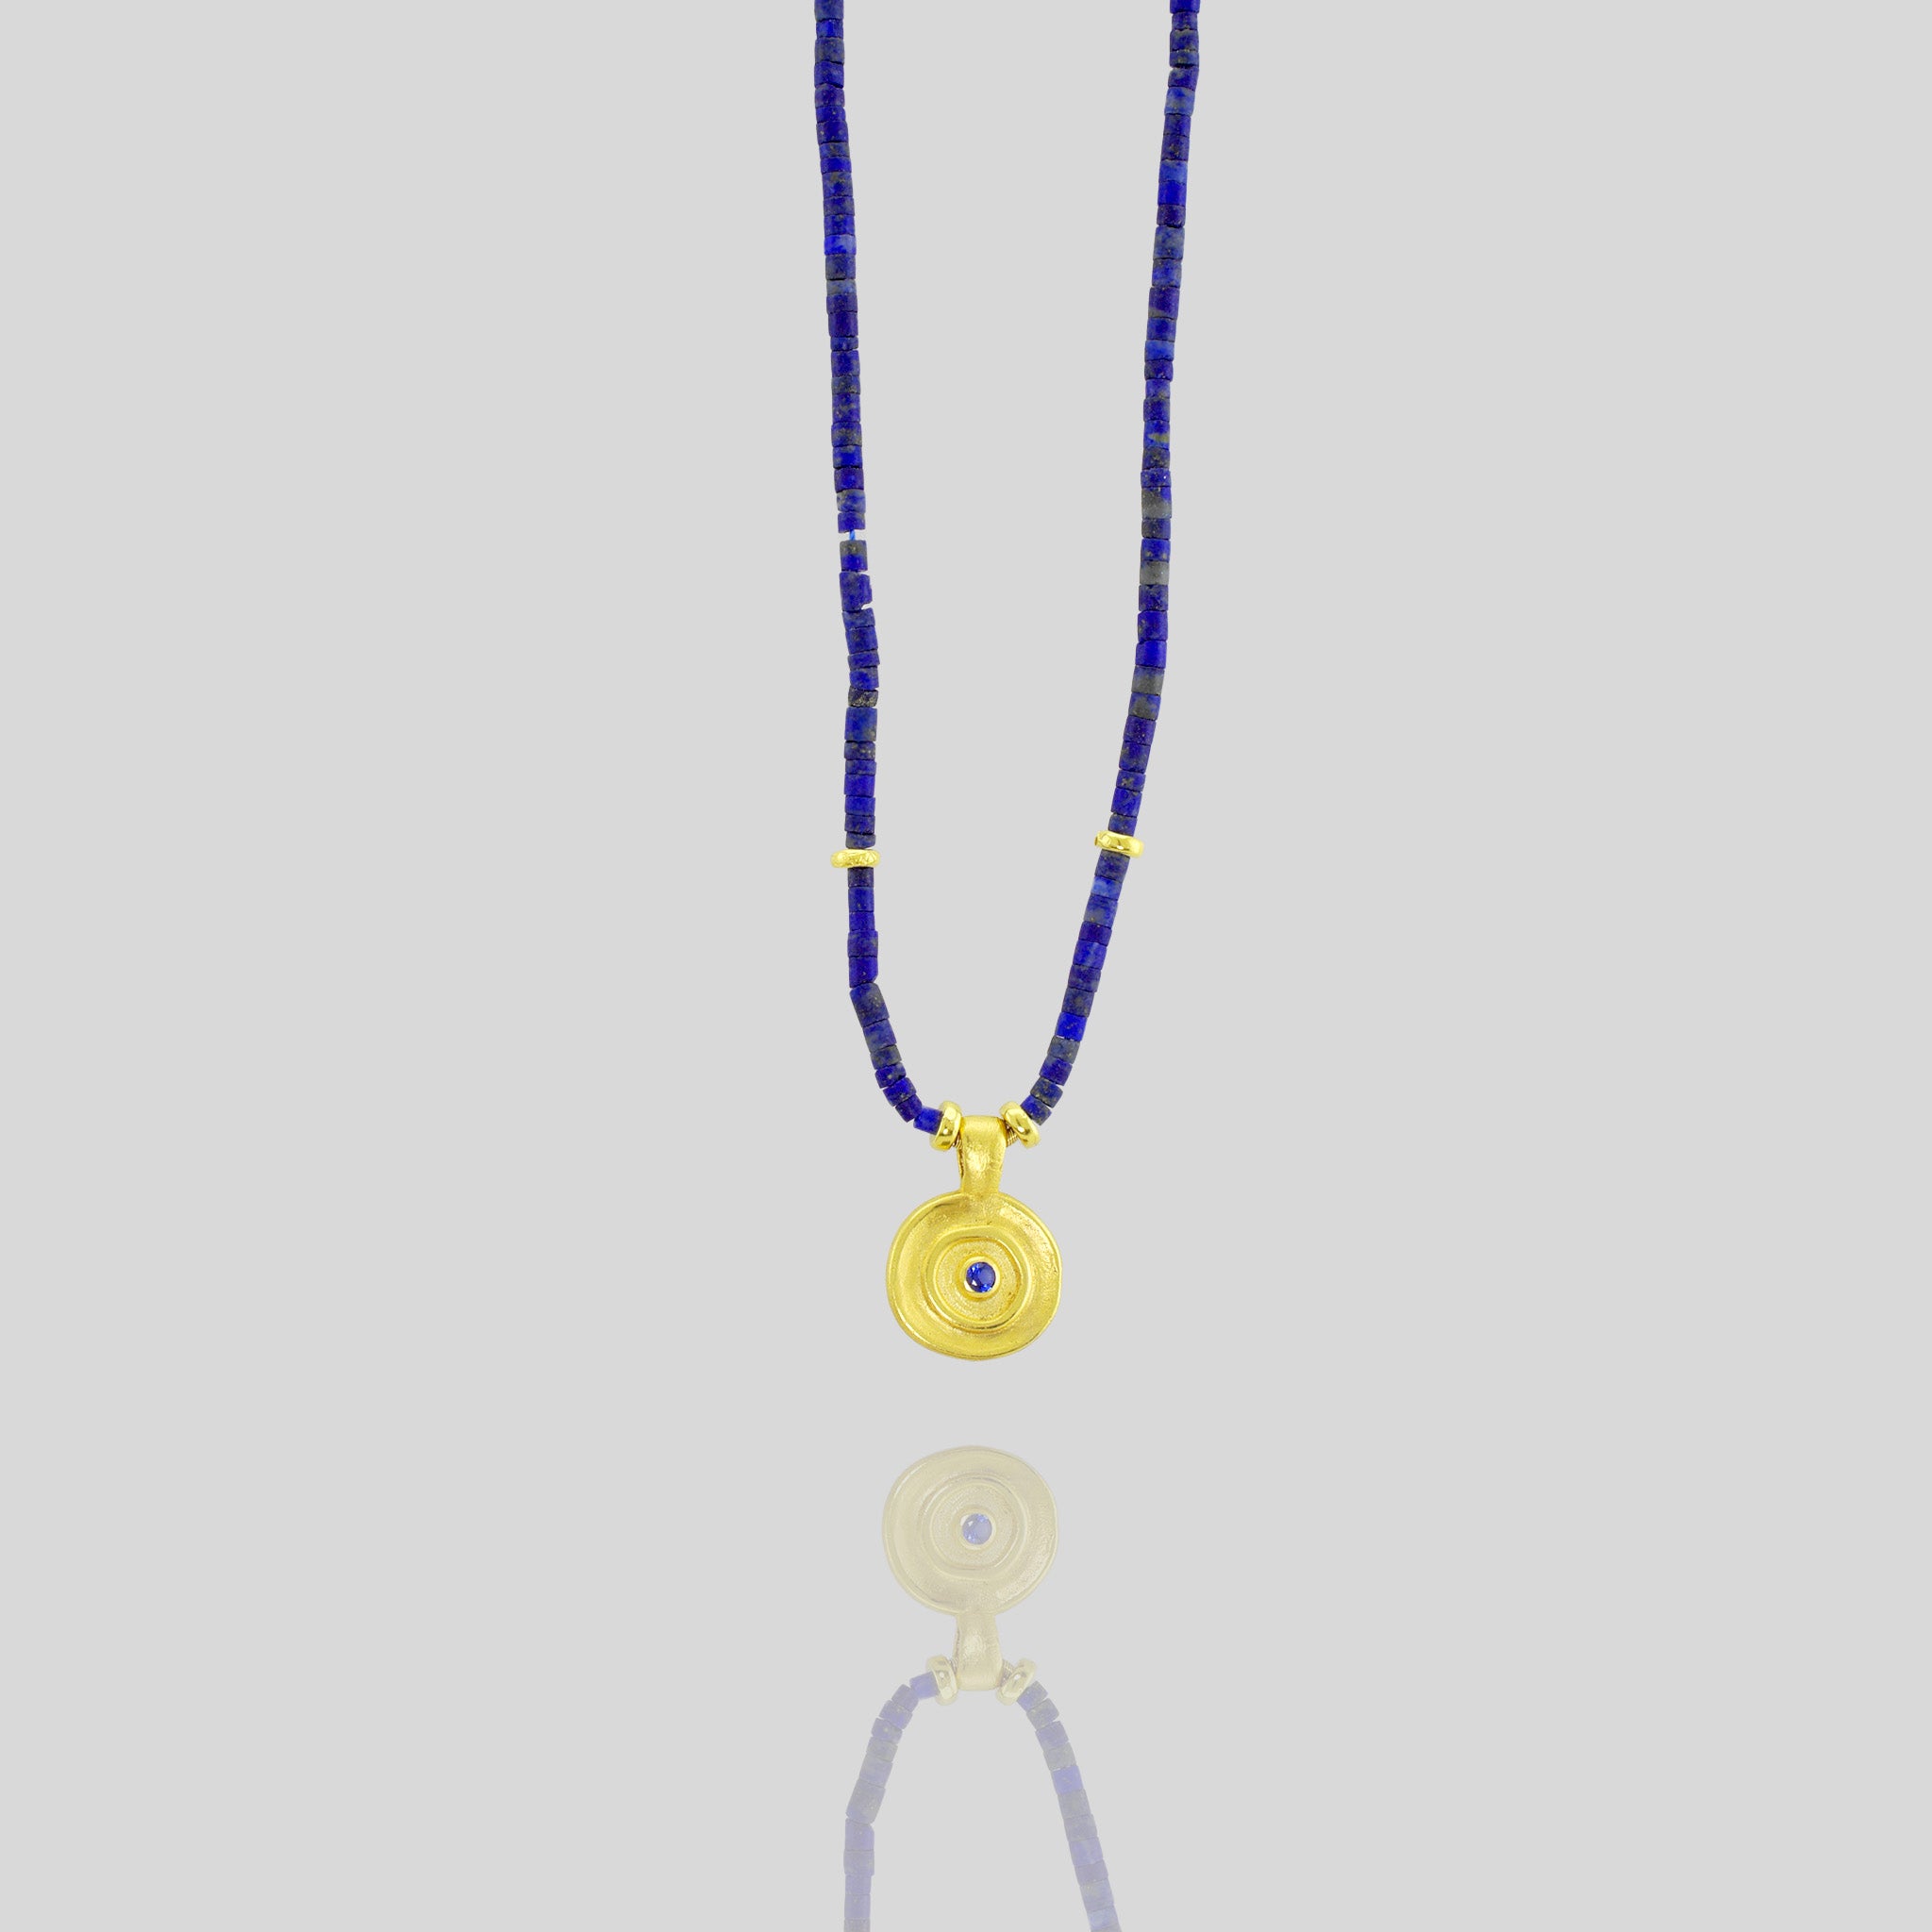 Pharaohs II - Lapis lazuli beads with ancient gold element necklace